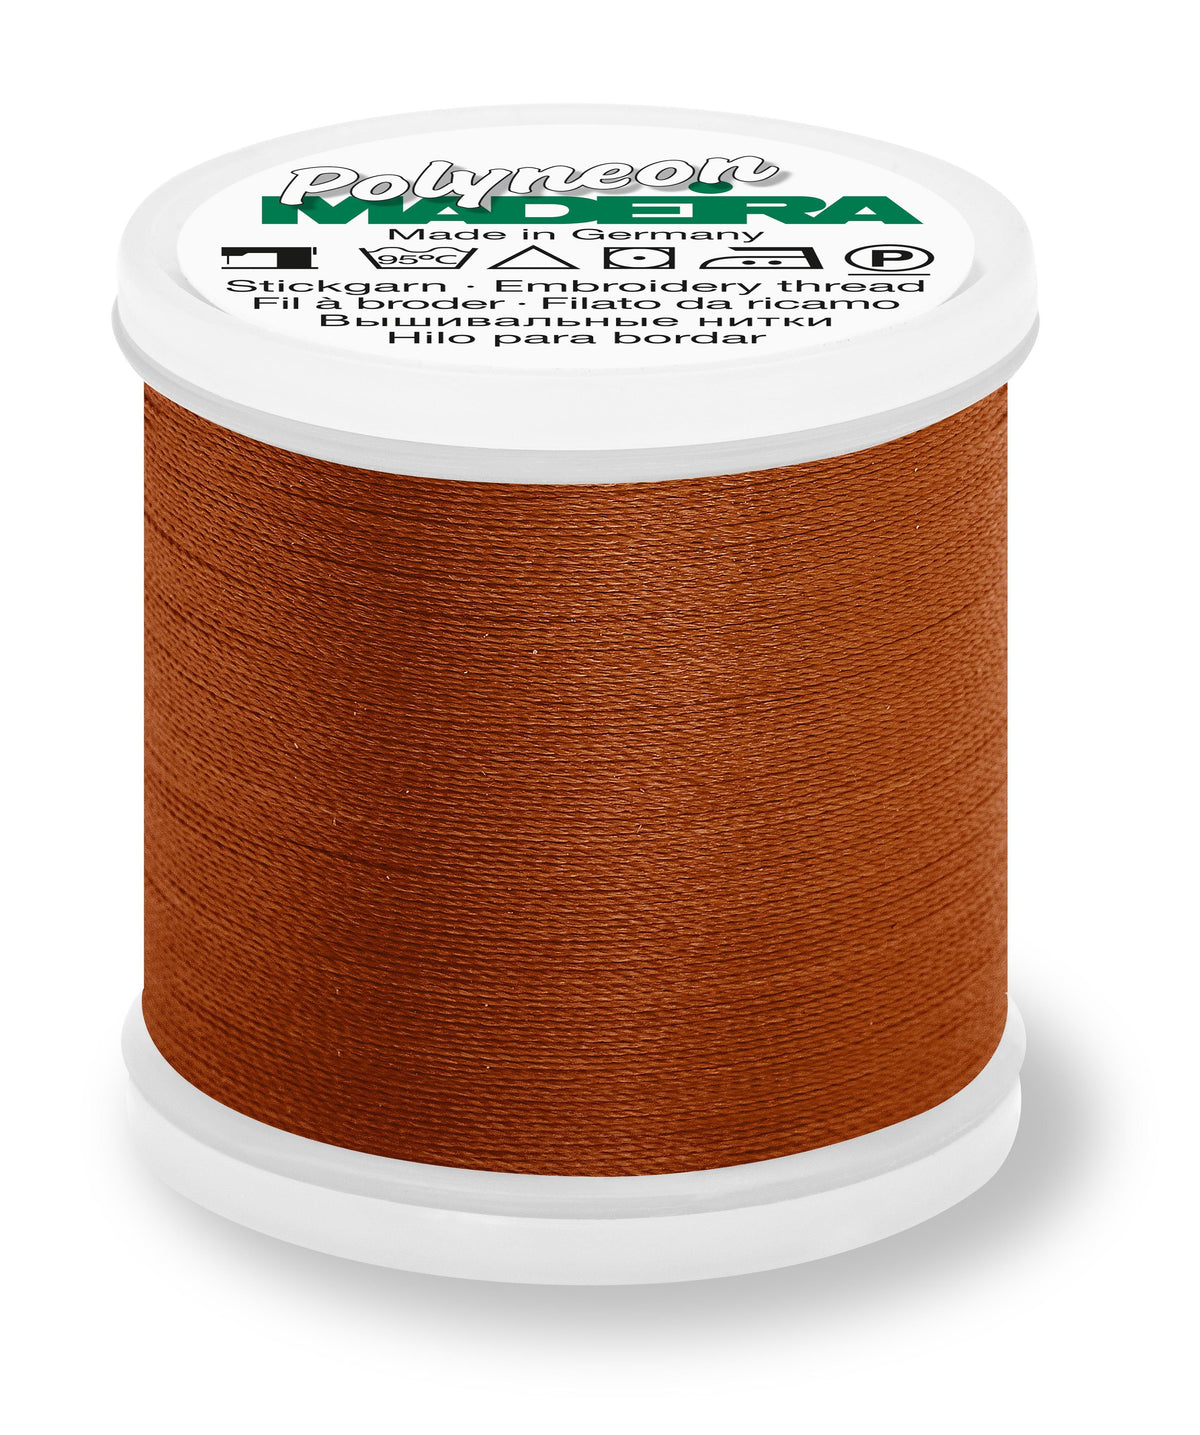 Madeira Poly Charcoal 2000yd Serger Thread - 91288401